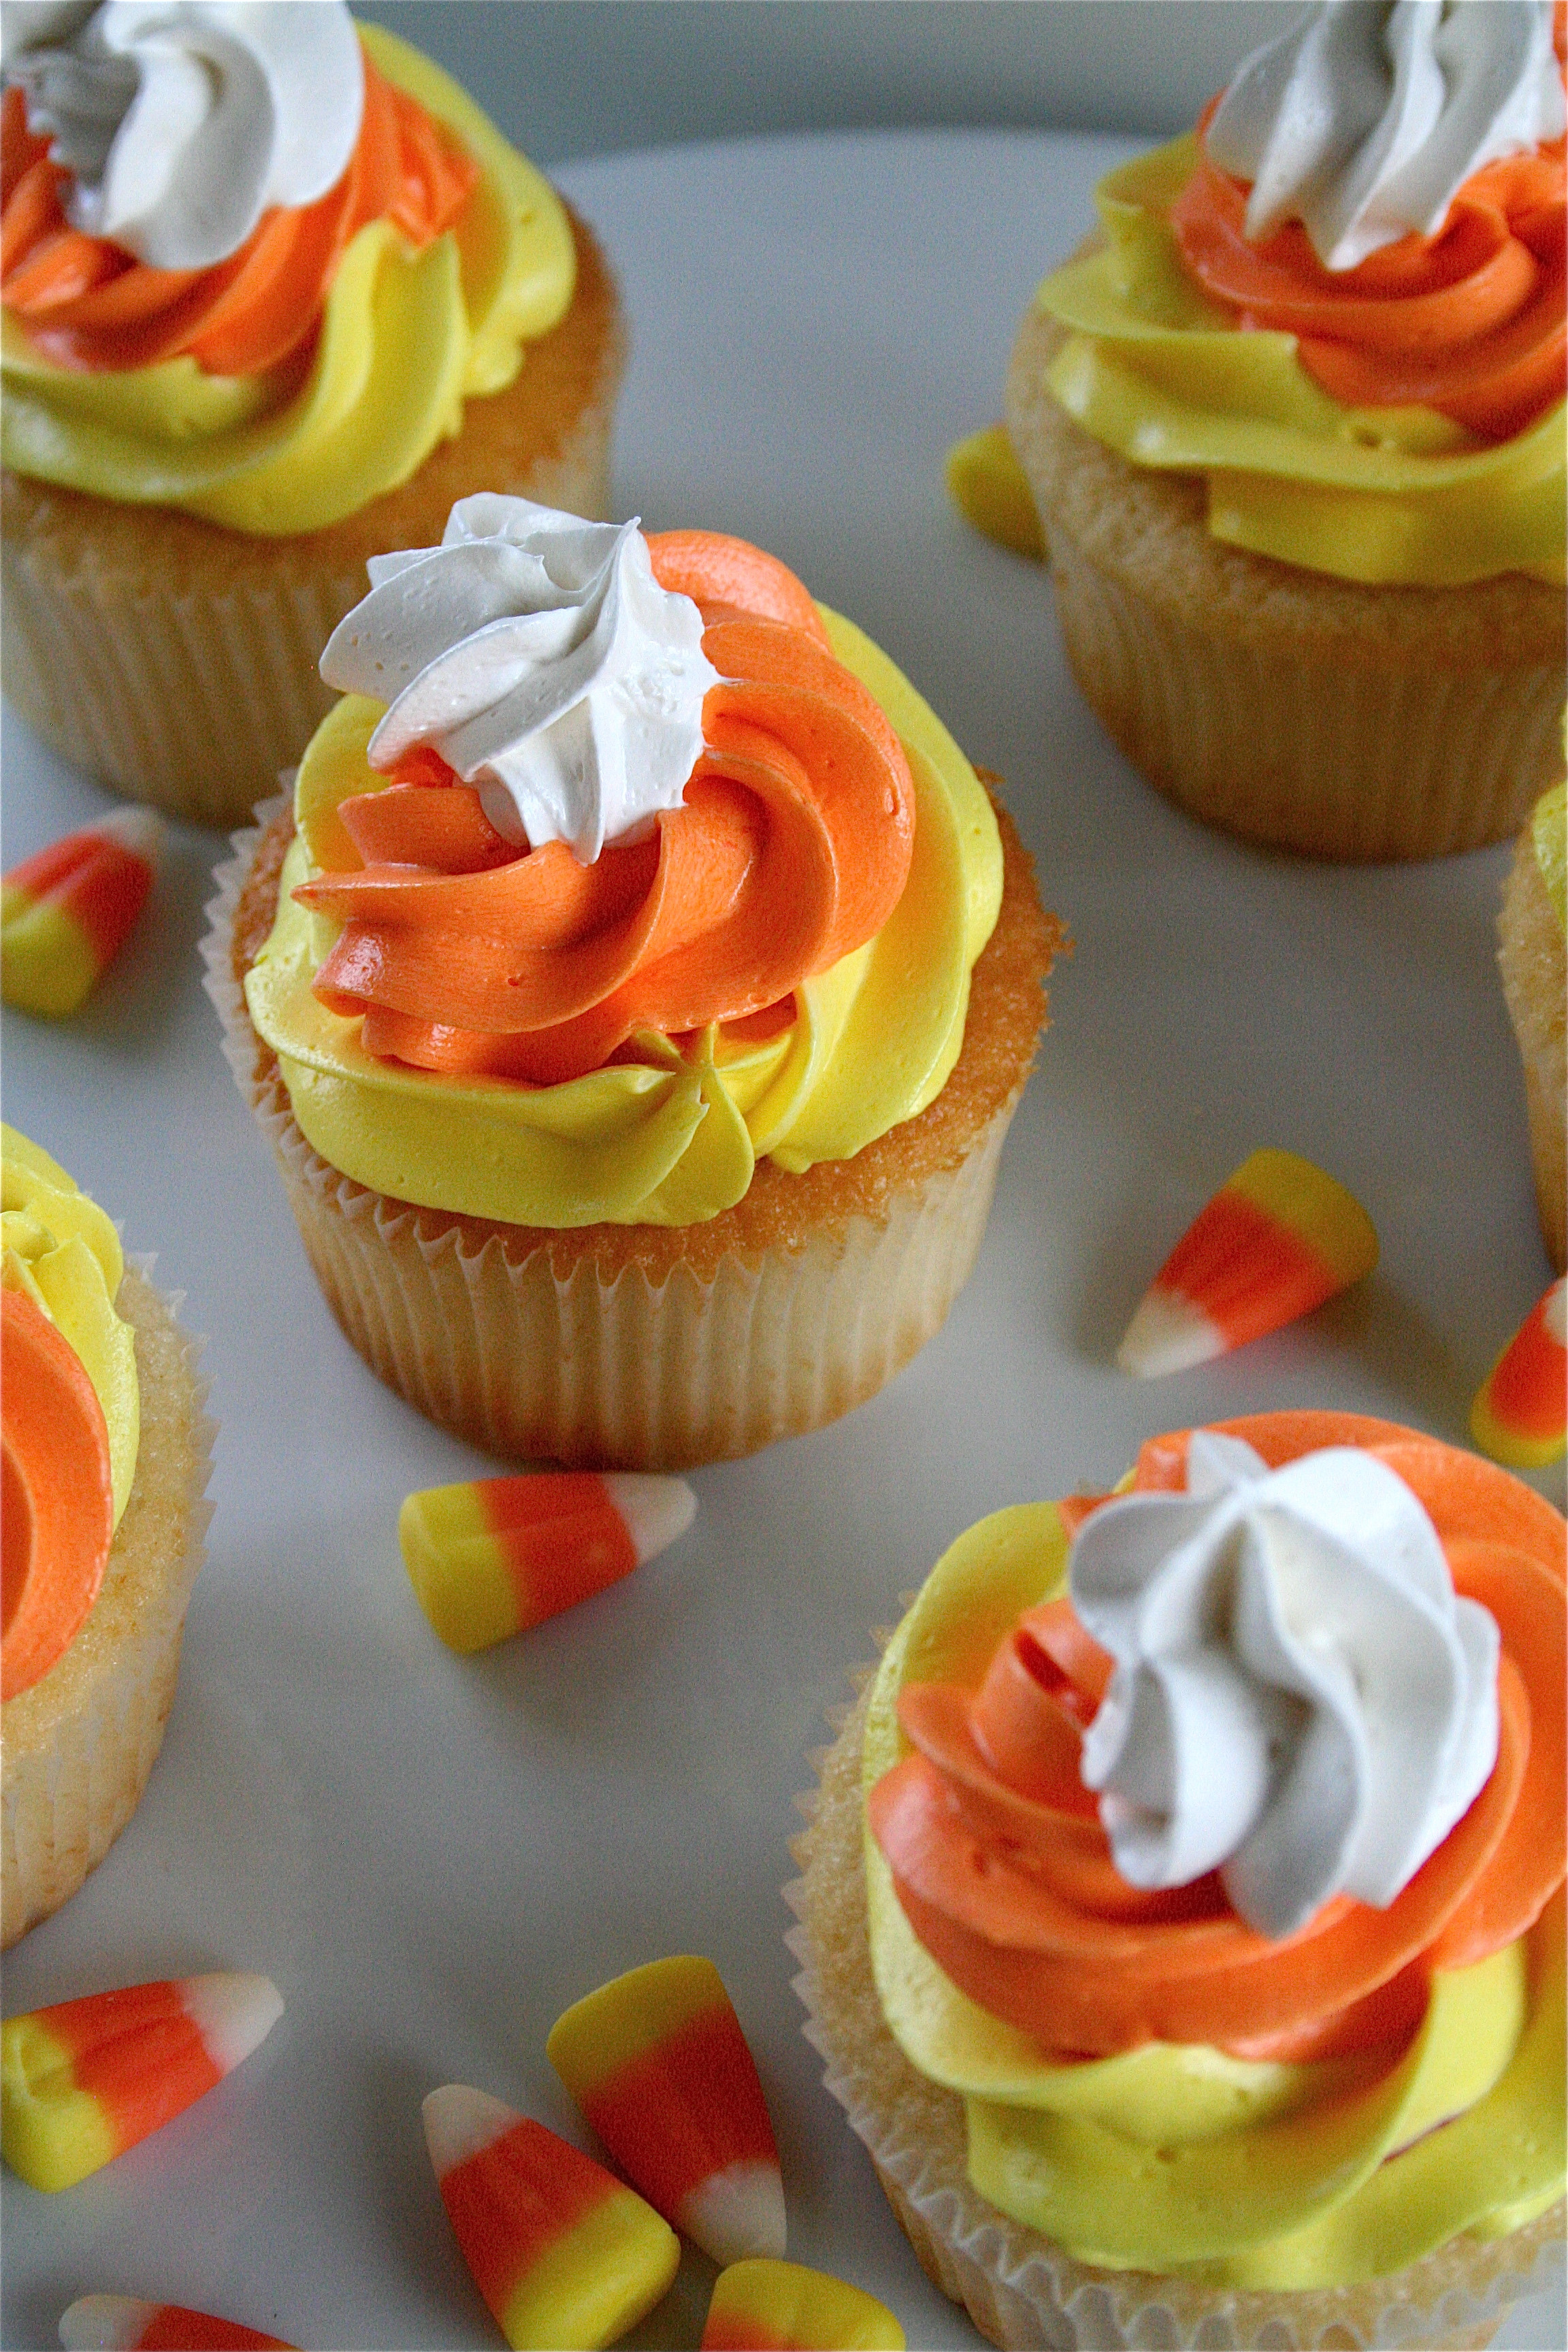 Cute Halloween Cupcakes
 28 Cute Halloween Cupcakes Easy Recipes for Halloween